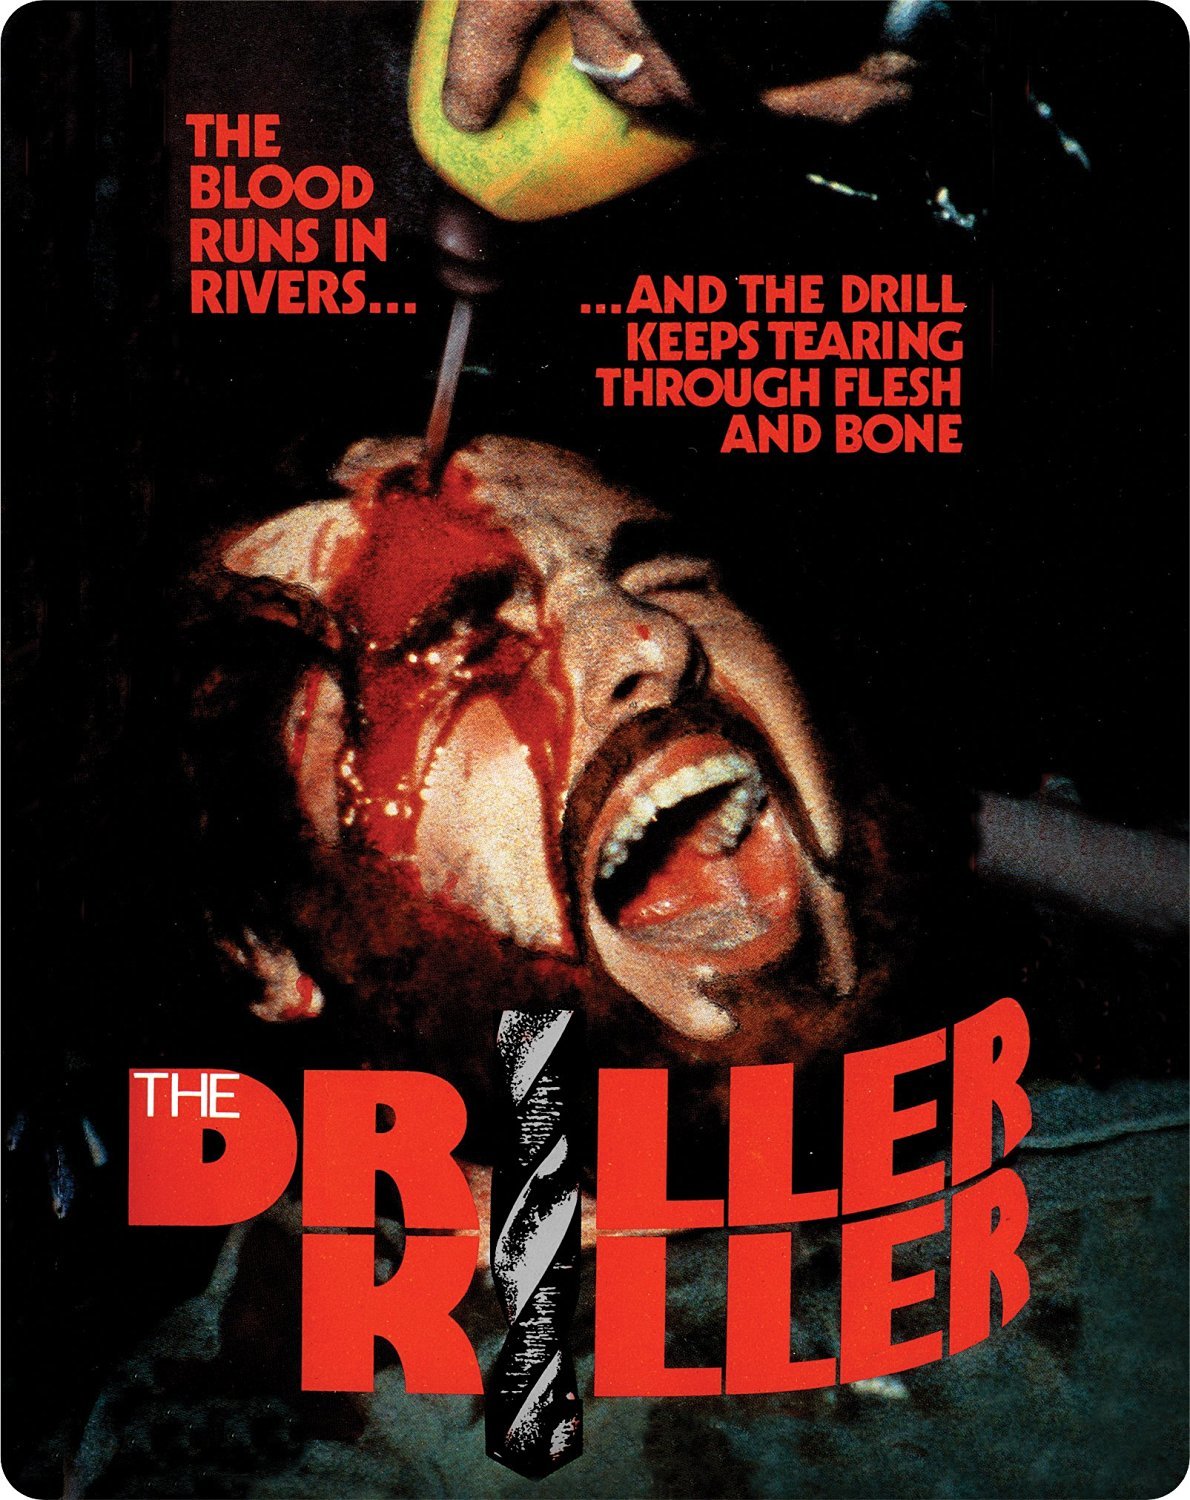 THE DRILLER KILLER (LIMITED EDITION) BLU-RAY/DVD STEELBOOK [SCRATCH AND DENT]